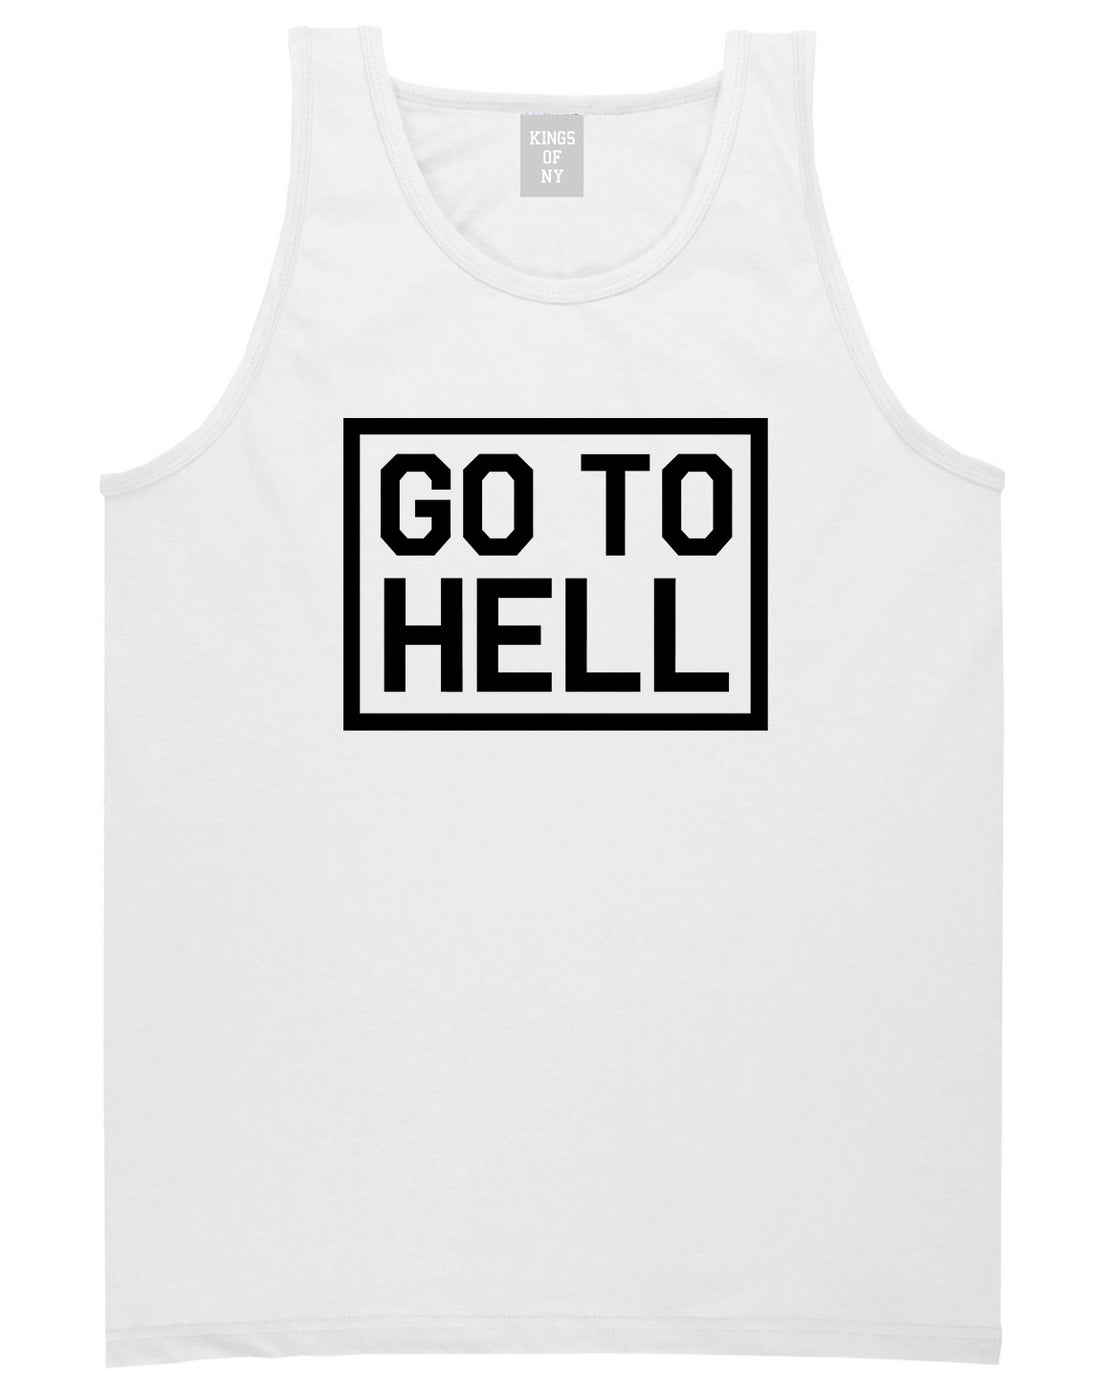 Go To Hell Mens White Tank Top Shirt by KINGS OF NY